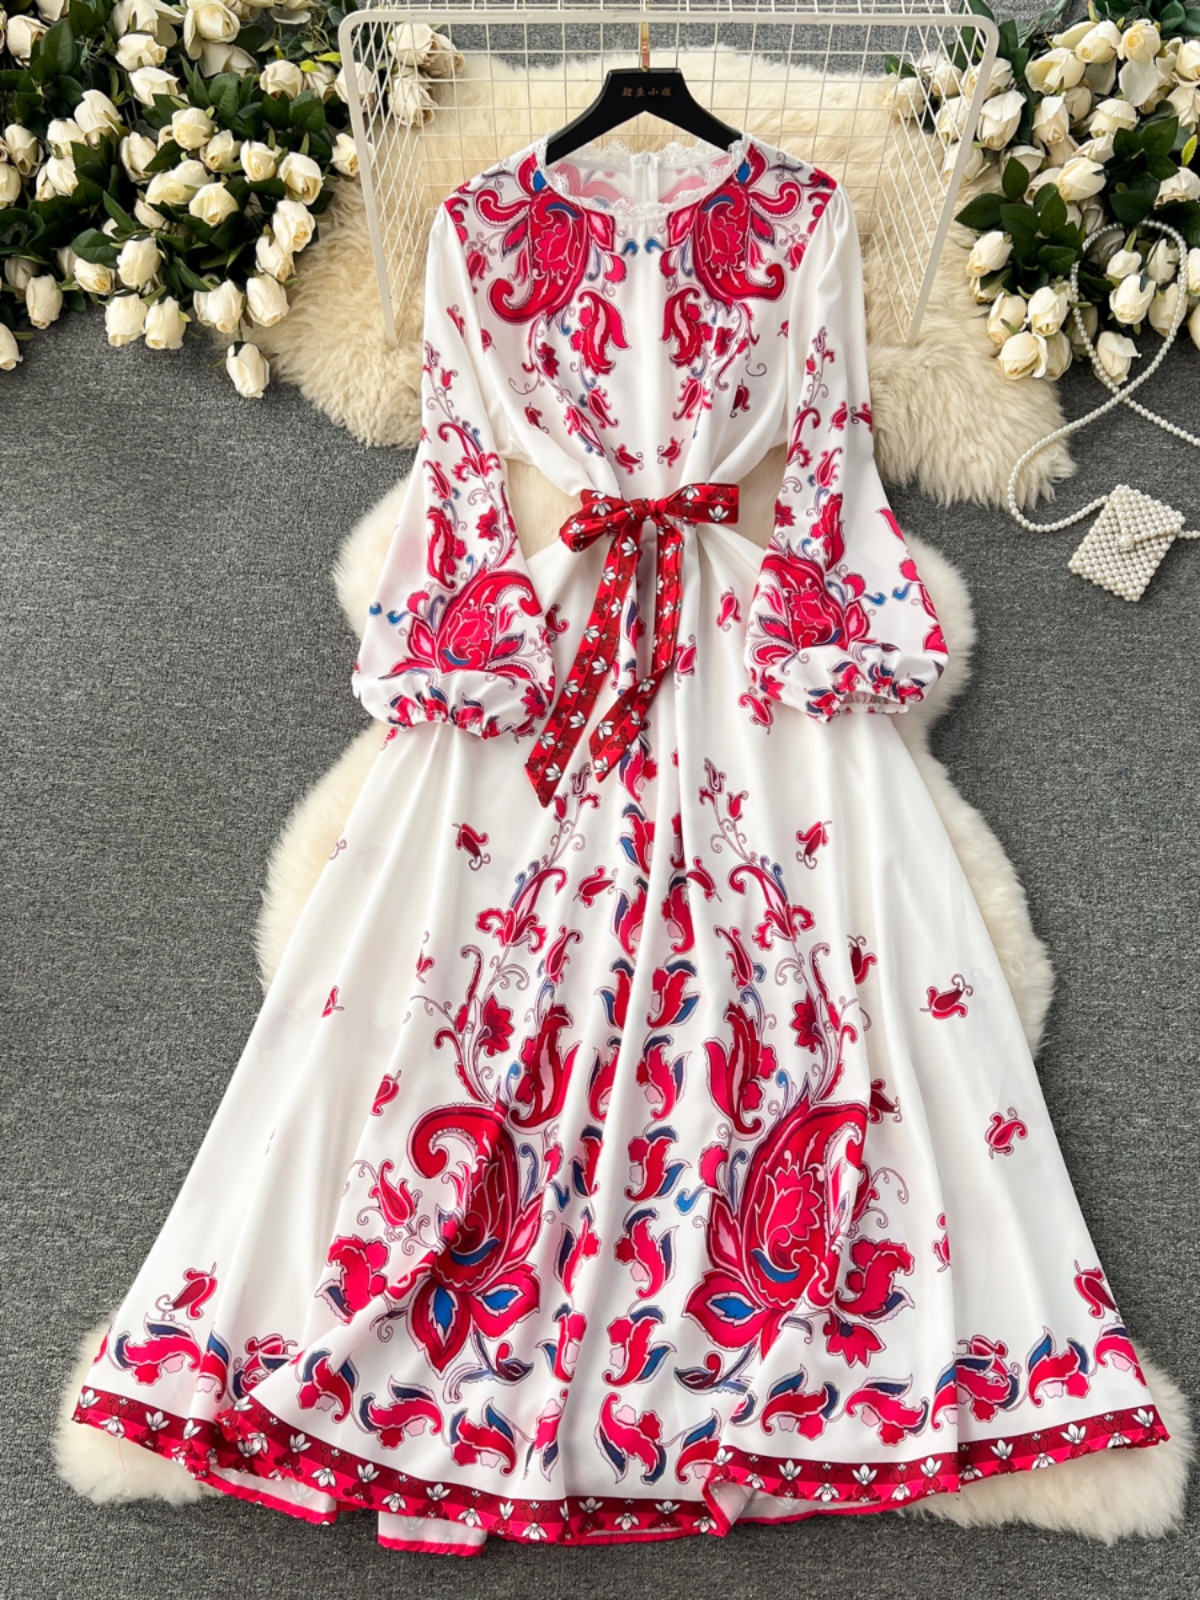 French retro court style dress for women, sweet lace lace lace round neck slim fit, long design, and floral print dress